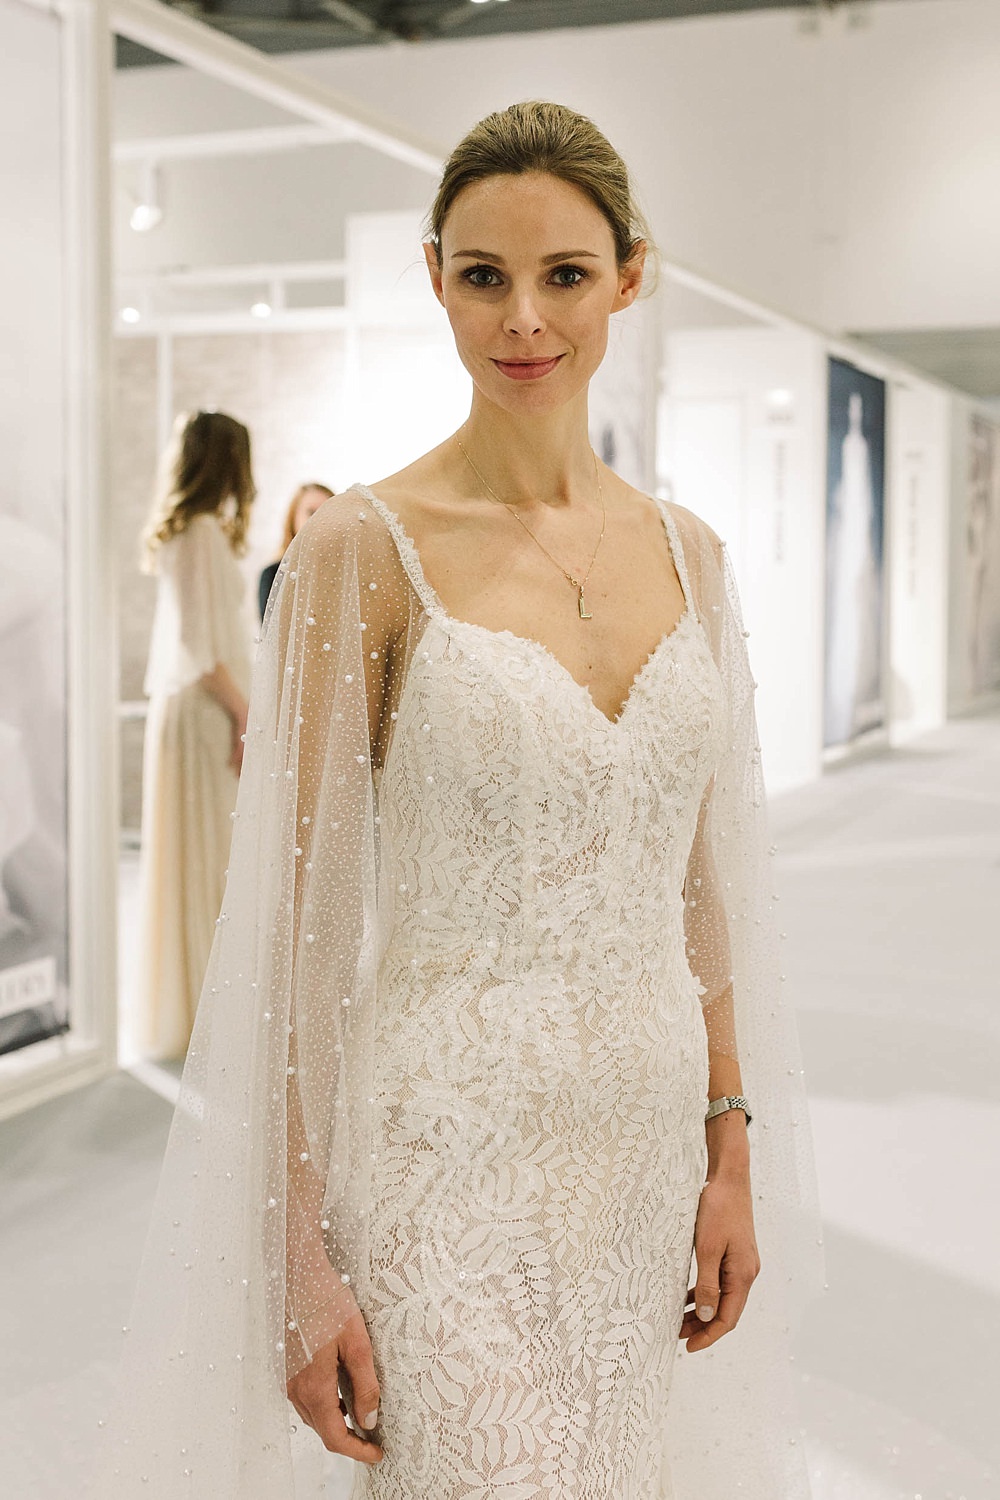 Anny Lin Bridal at White Gallery 2018